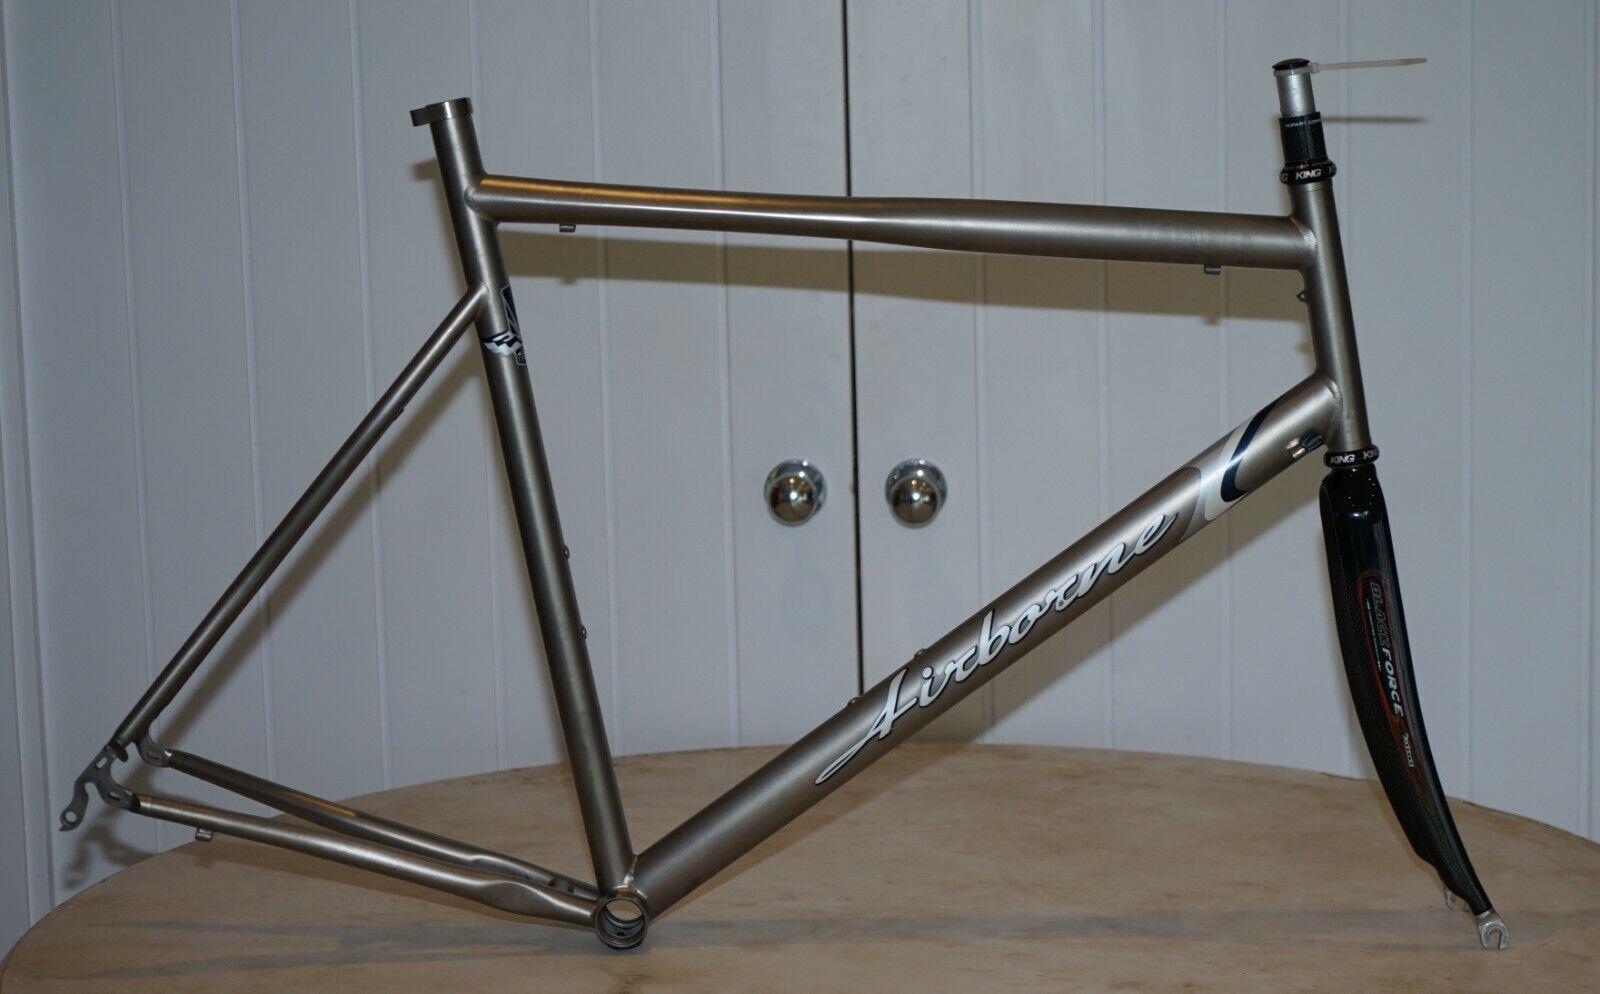 We are delighted to offer for sale this lovely Airborne 3AL-2.5V titanium road or time trial frameset with Chris King sealed bearing headset and carbon bladed forks.

HISTORY

I am selling my entire bike collection which comprises of 16 bikes,